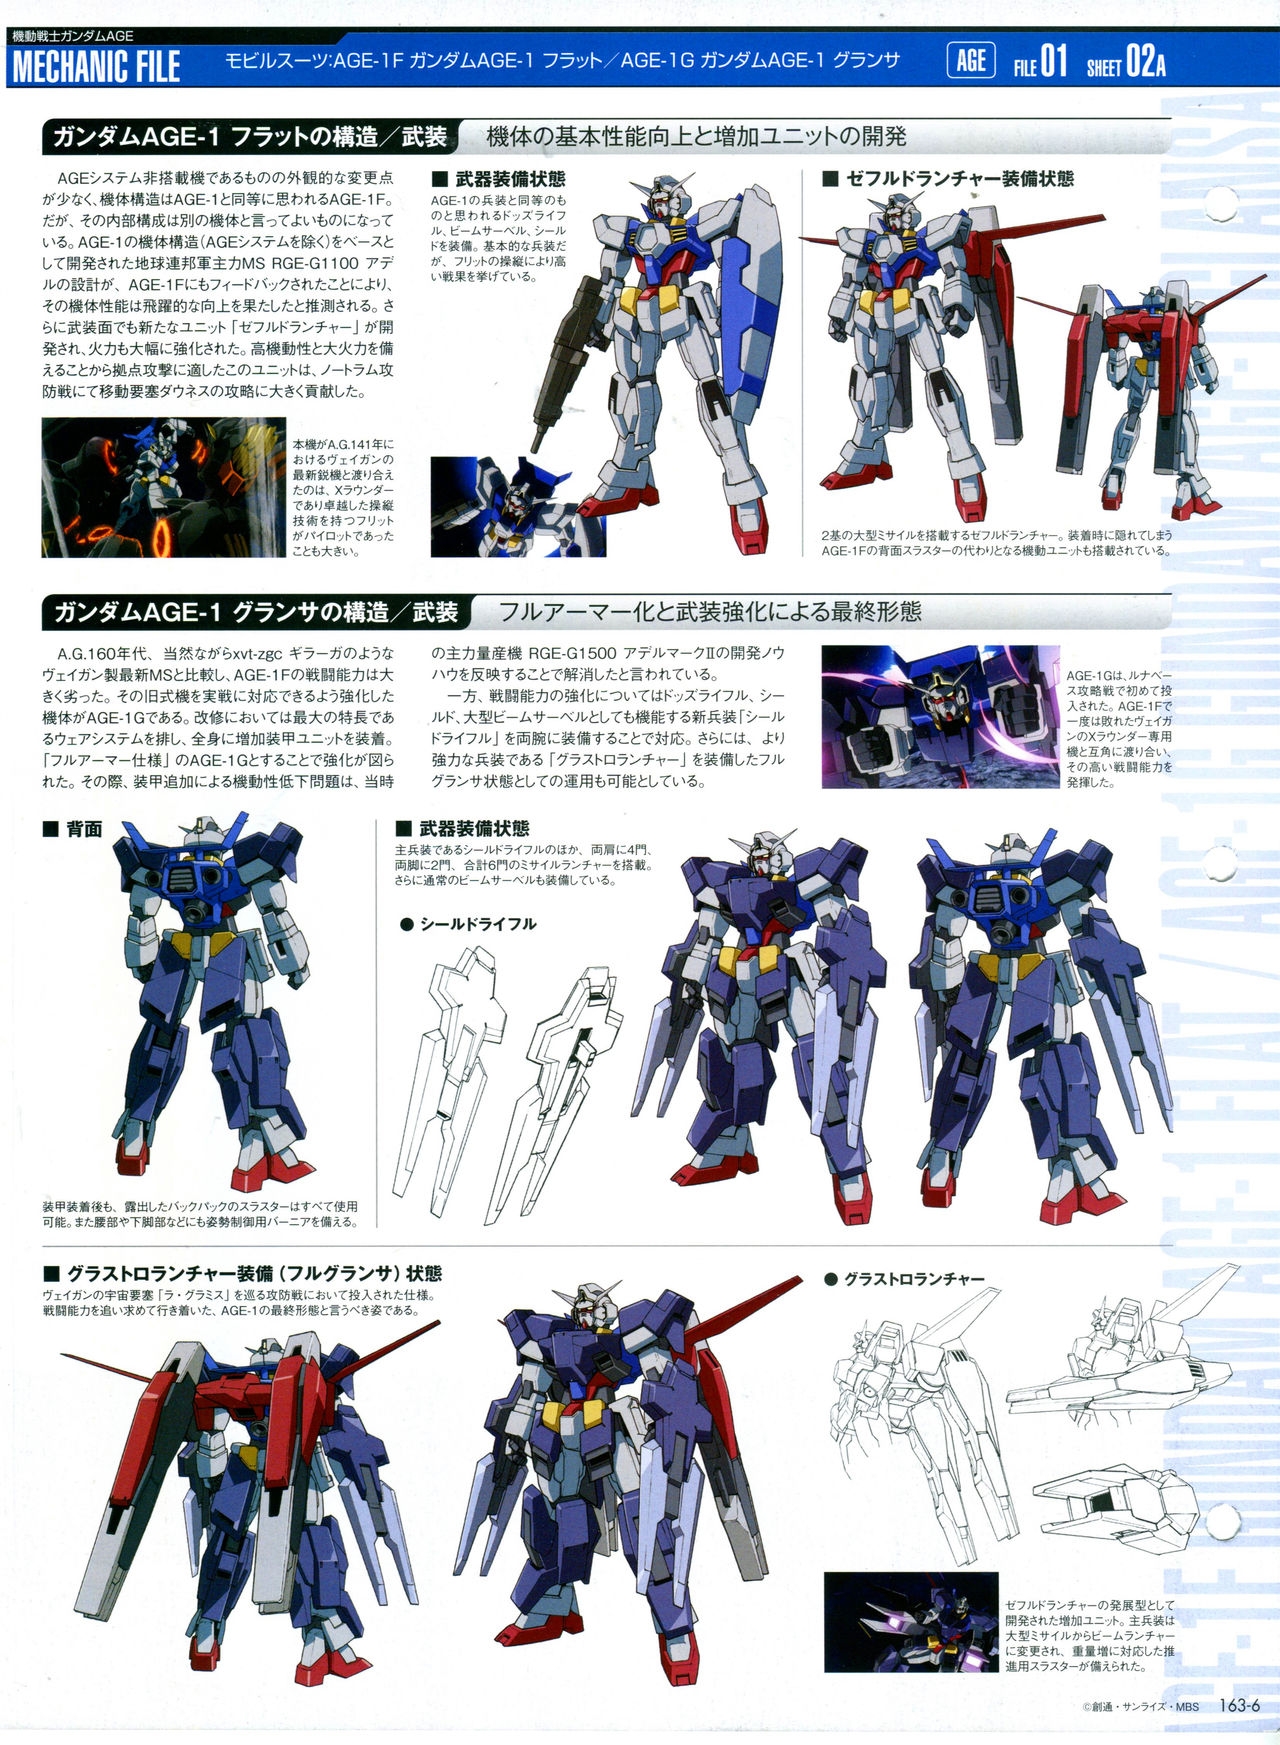 The Official Gundam Perfect File No.163 7